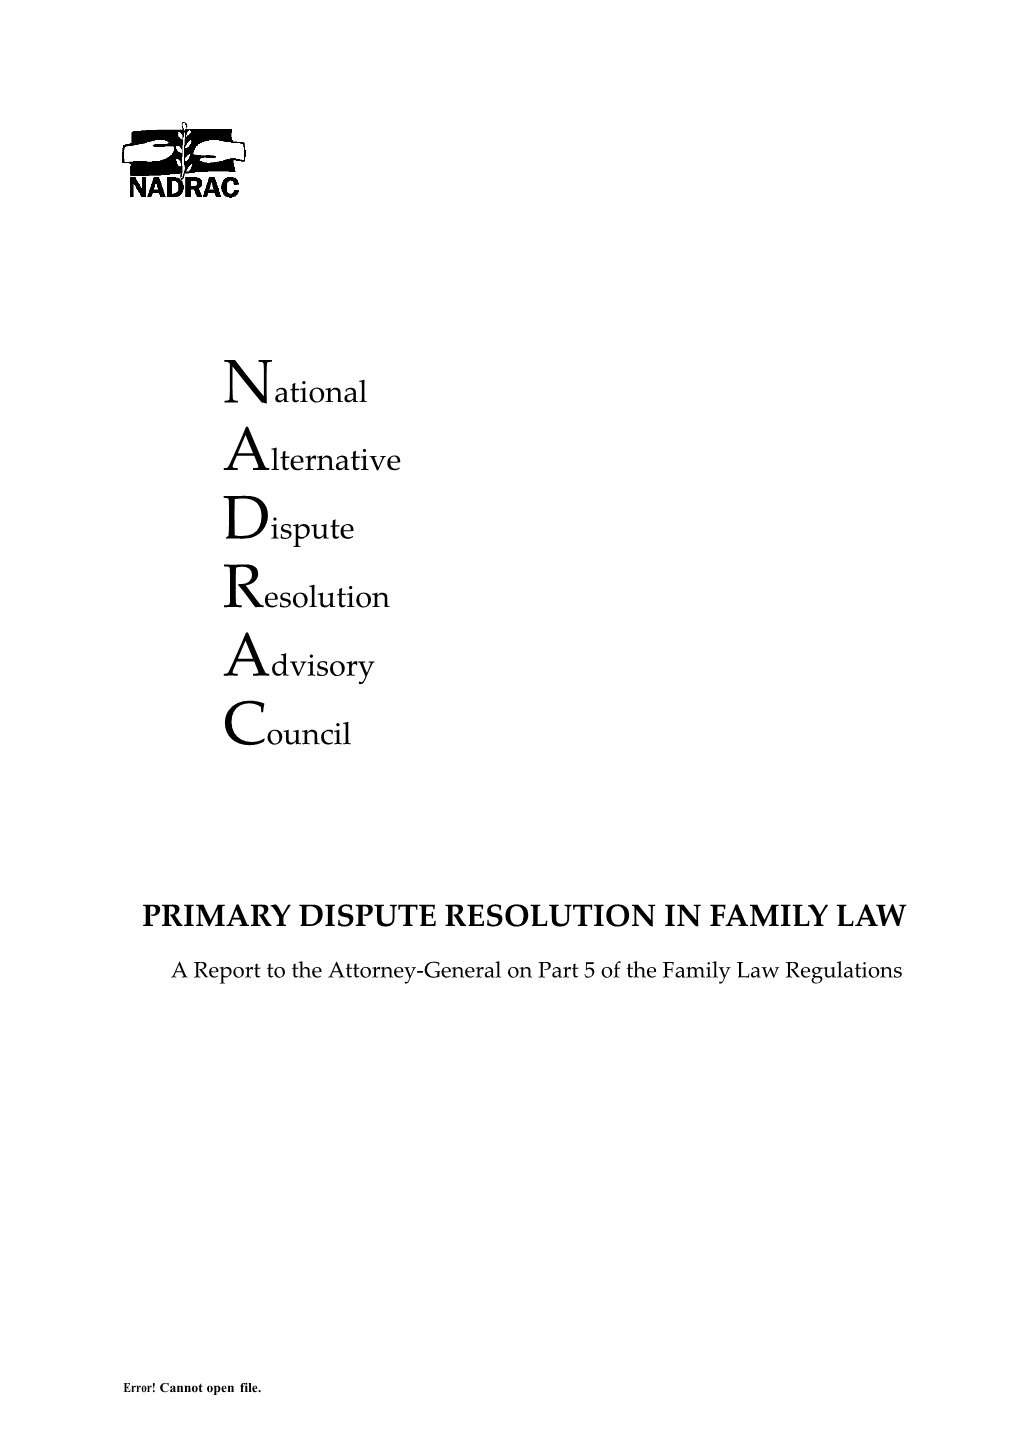 Primary Dispute Resoluton in Family Law